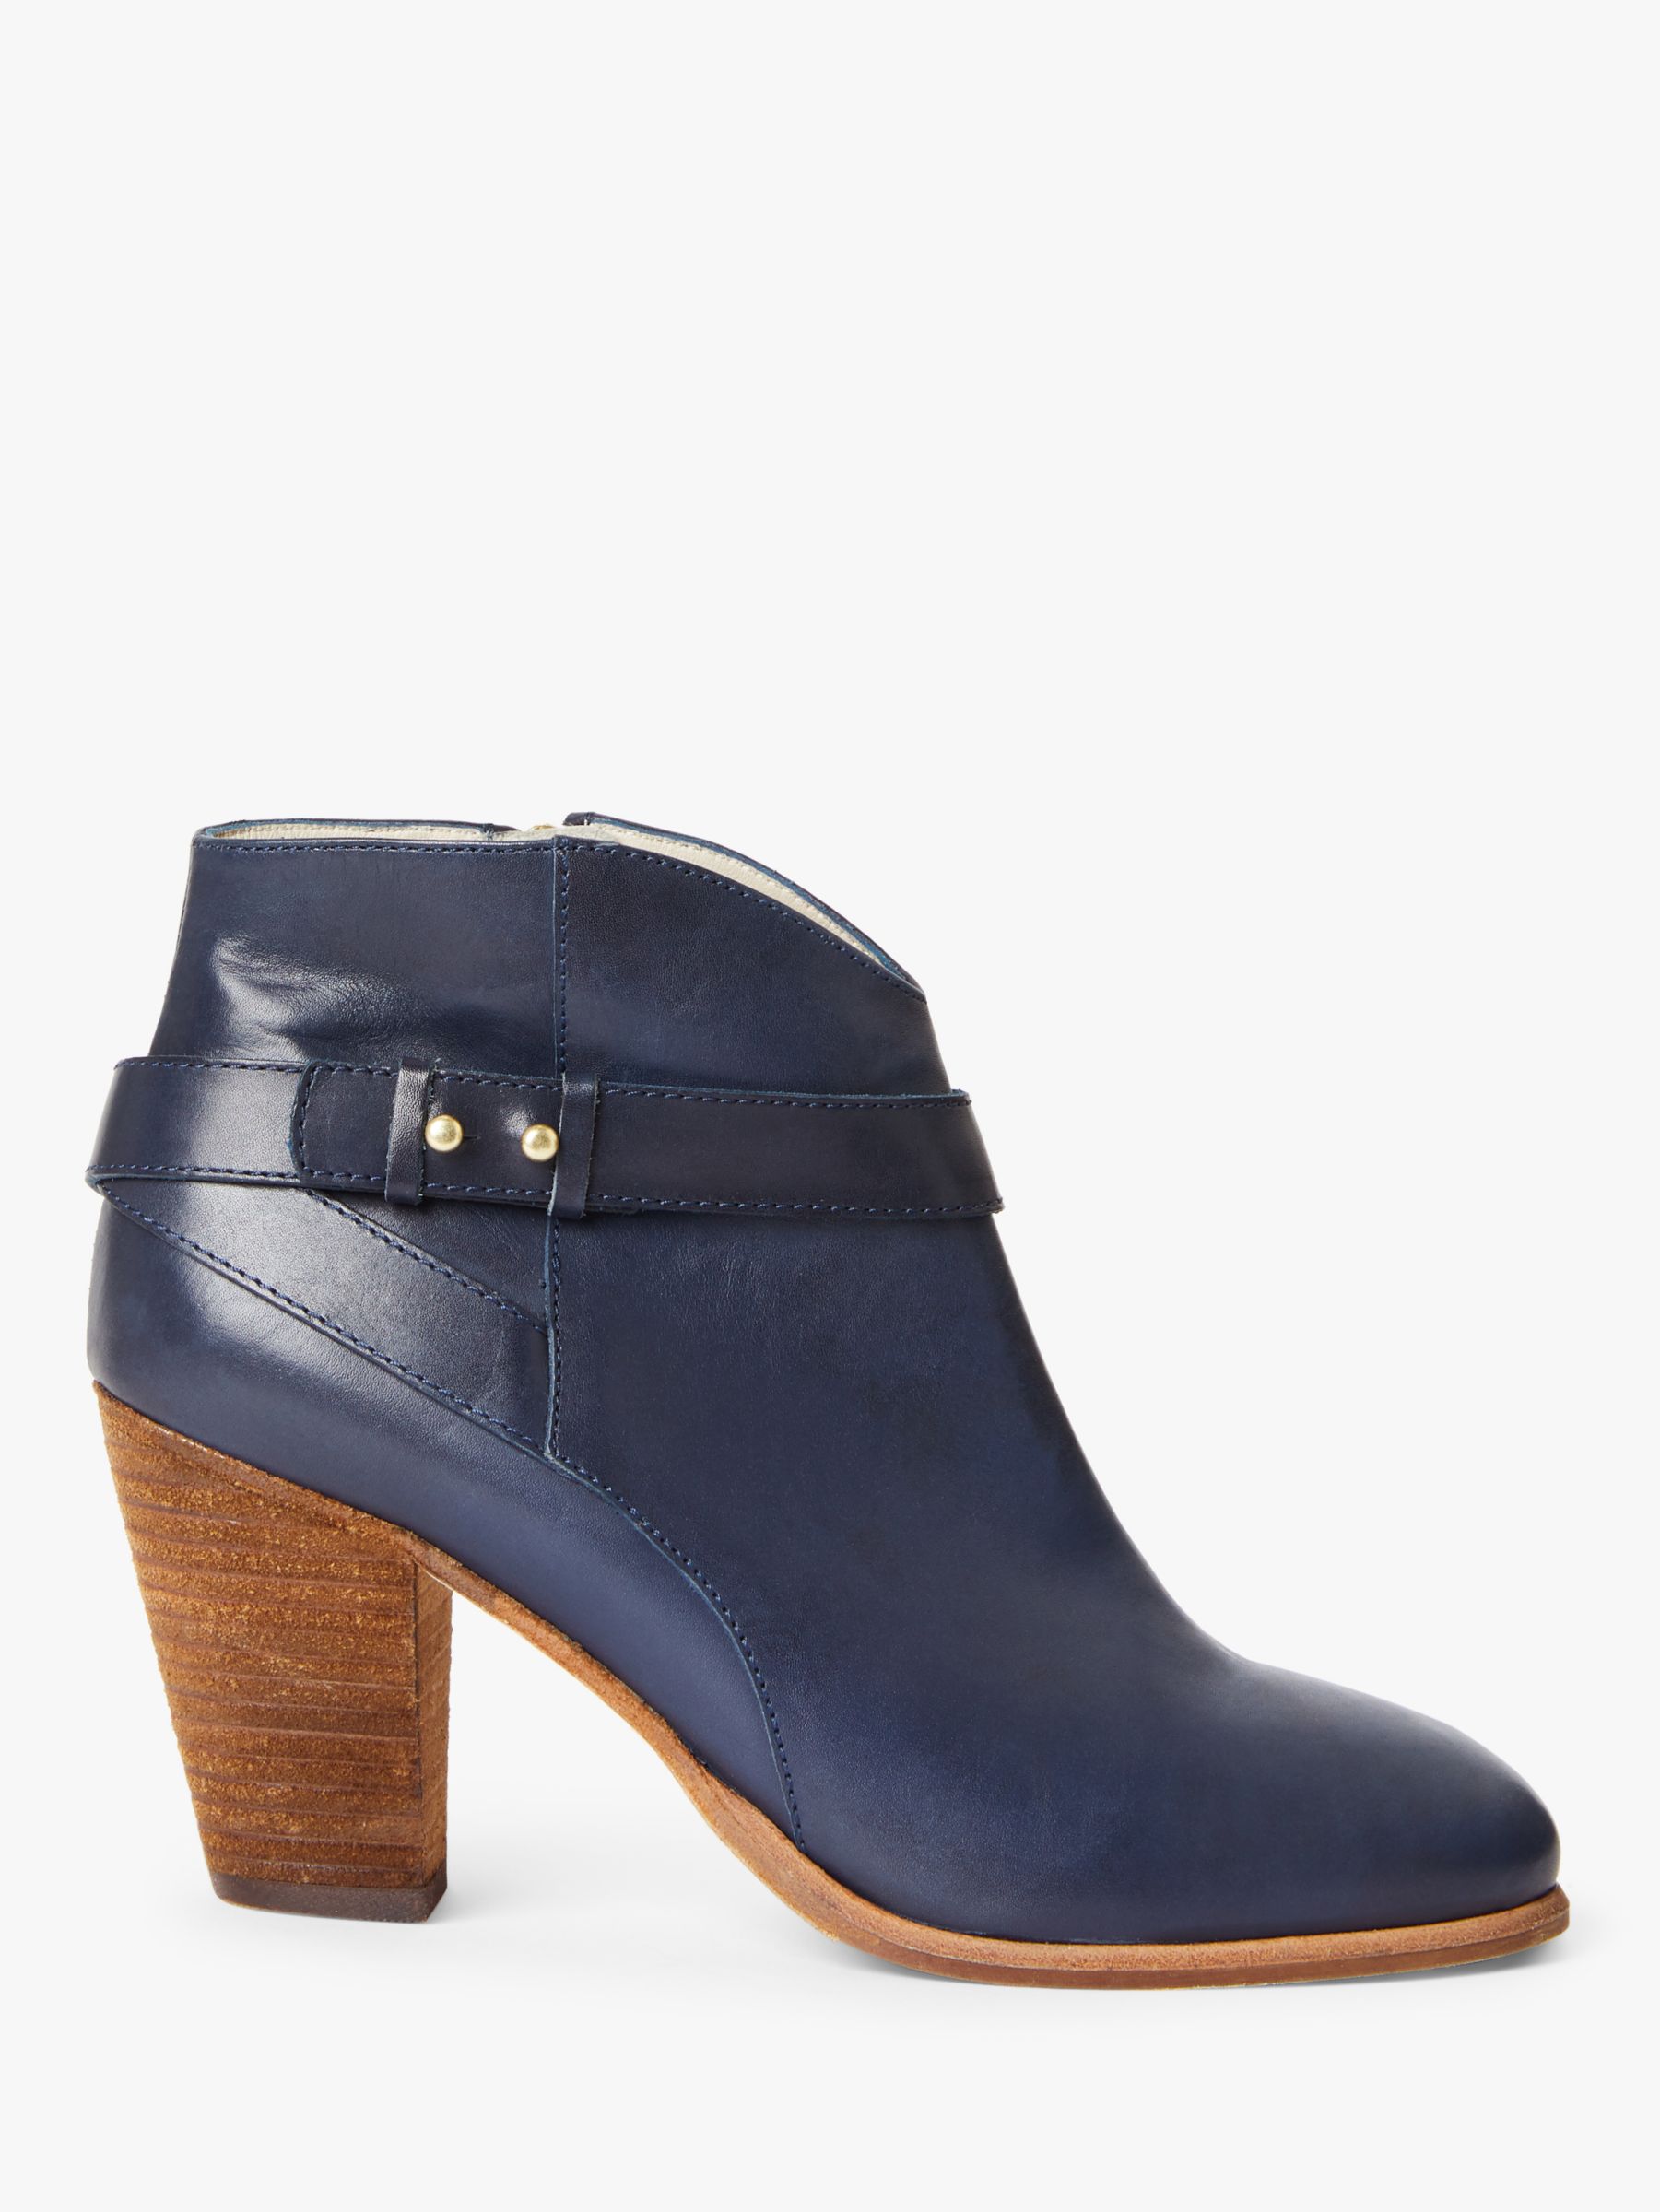 Boden Stratford Leather Heeled Ankle Boots at John Lewis & Partners